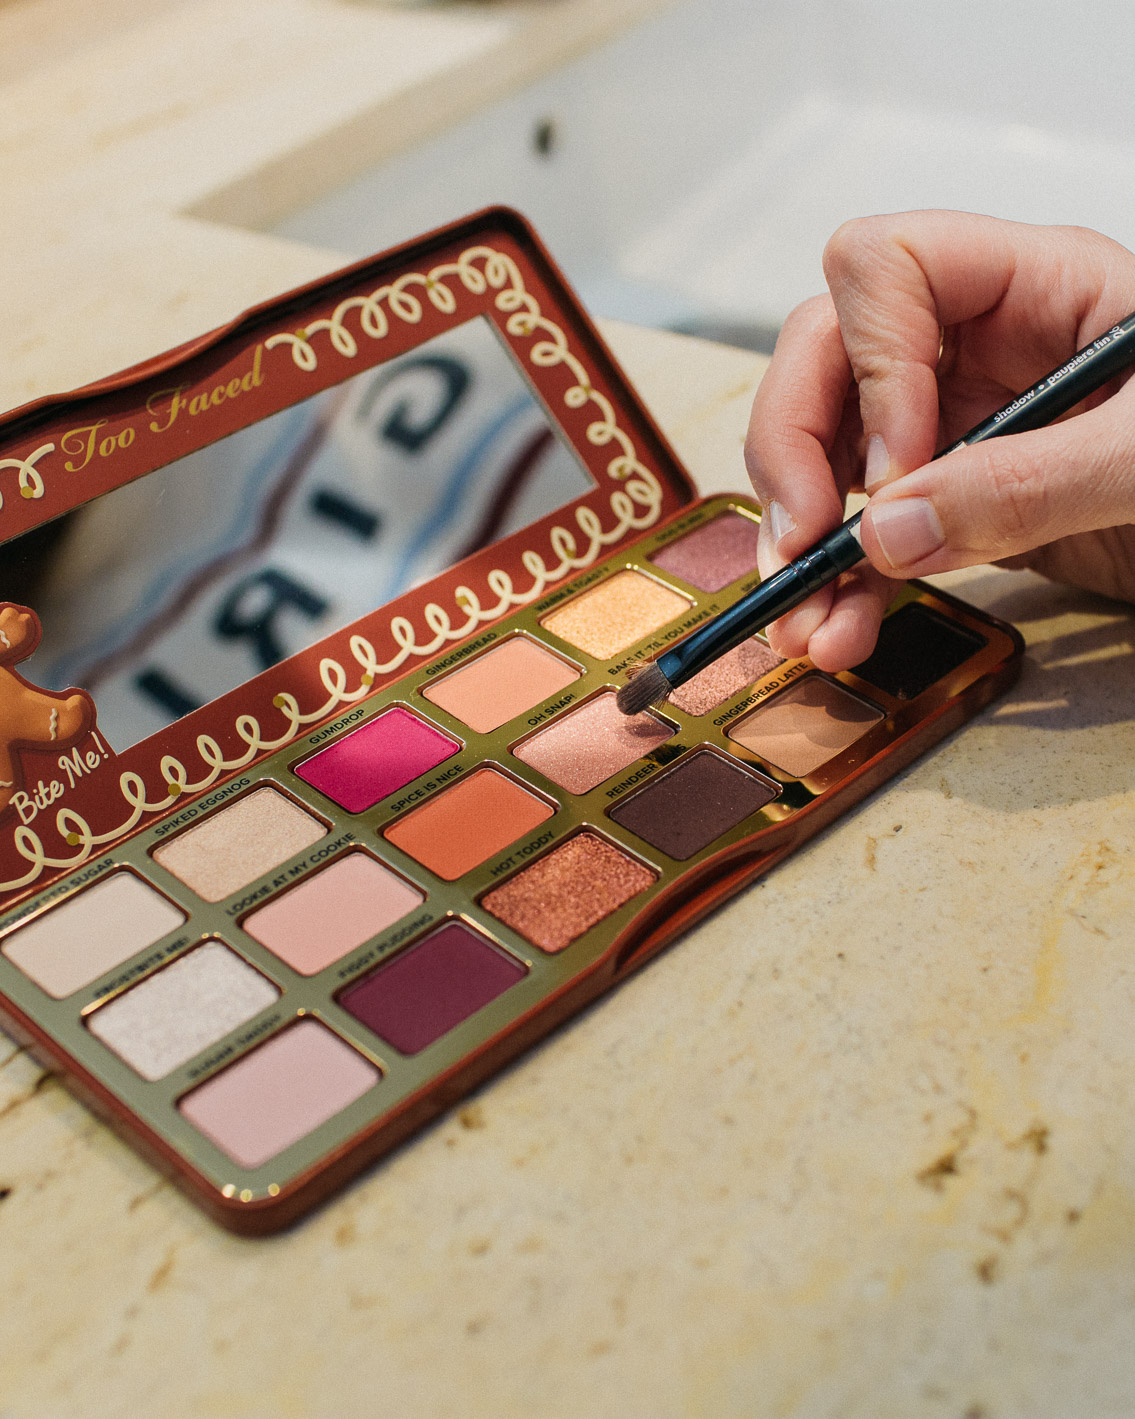 Gingerbread Too Faced eyeshadow palette - The cat, you and us